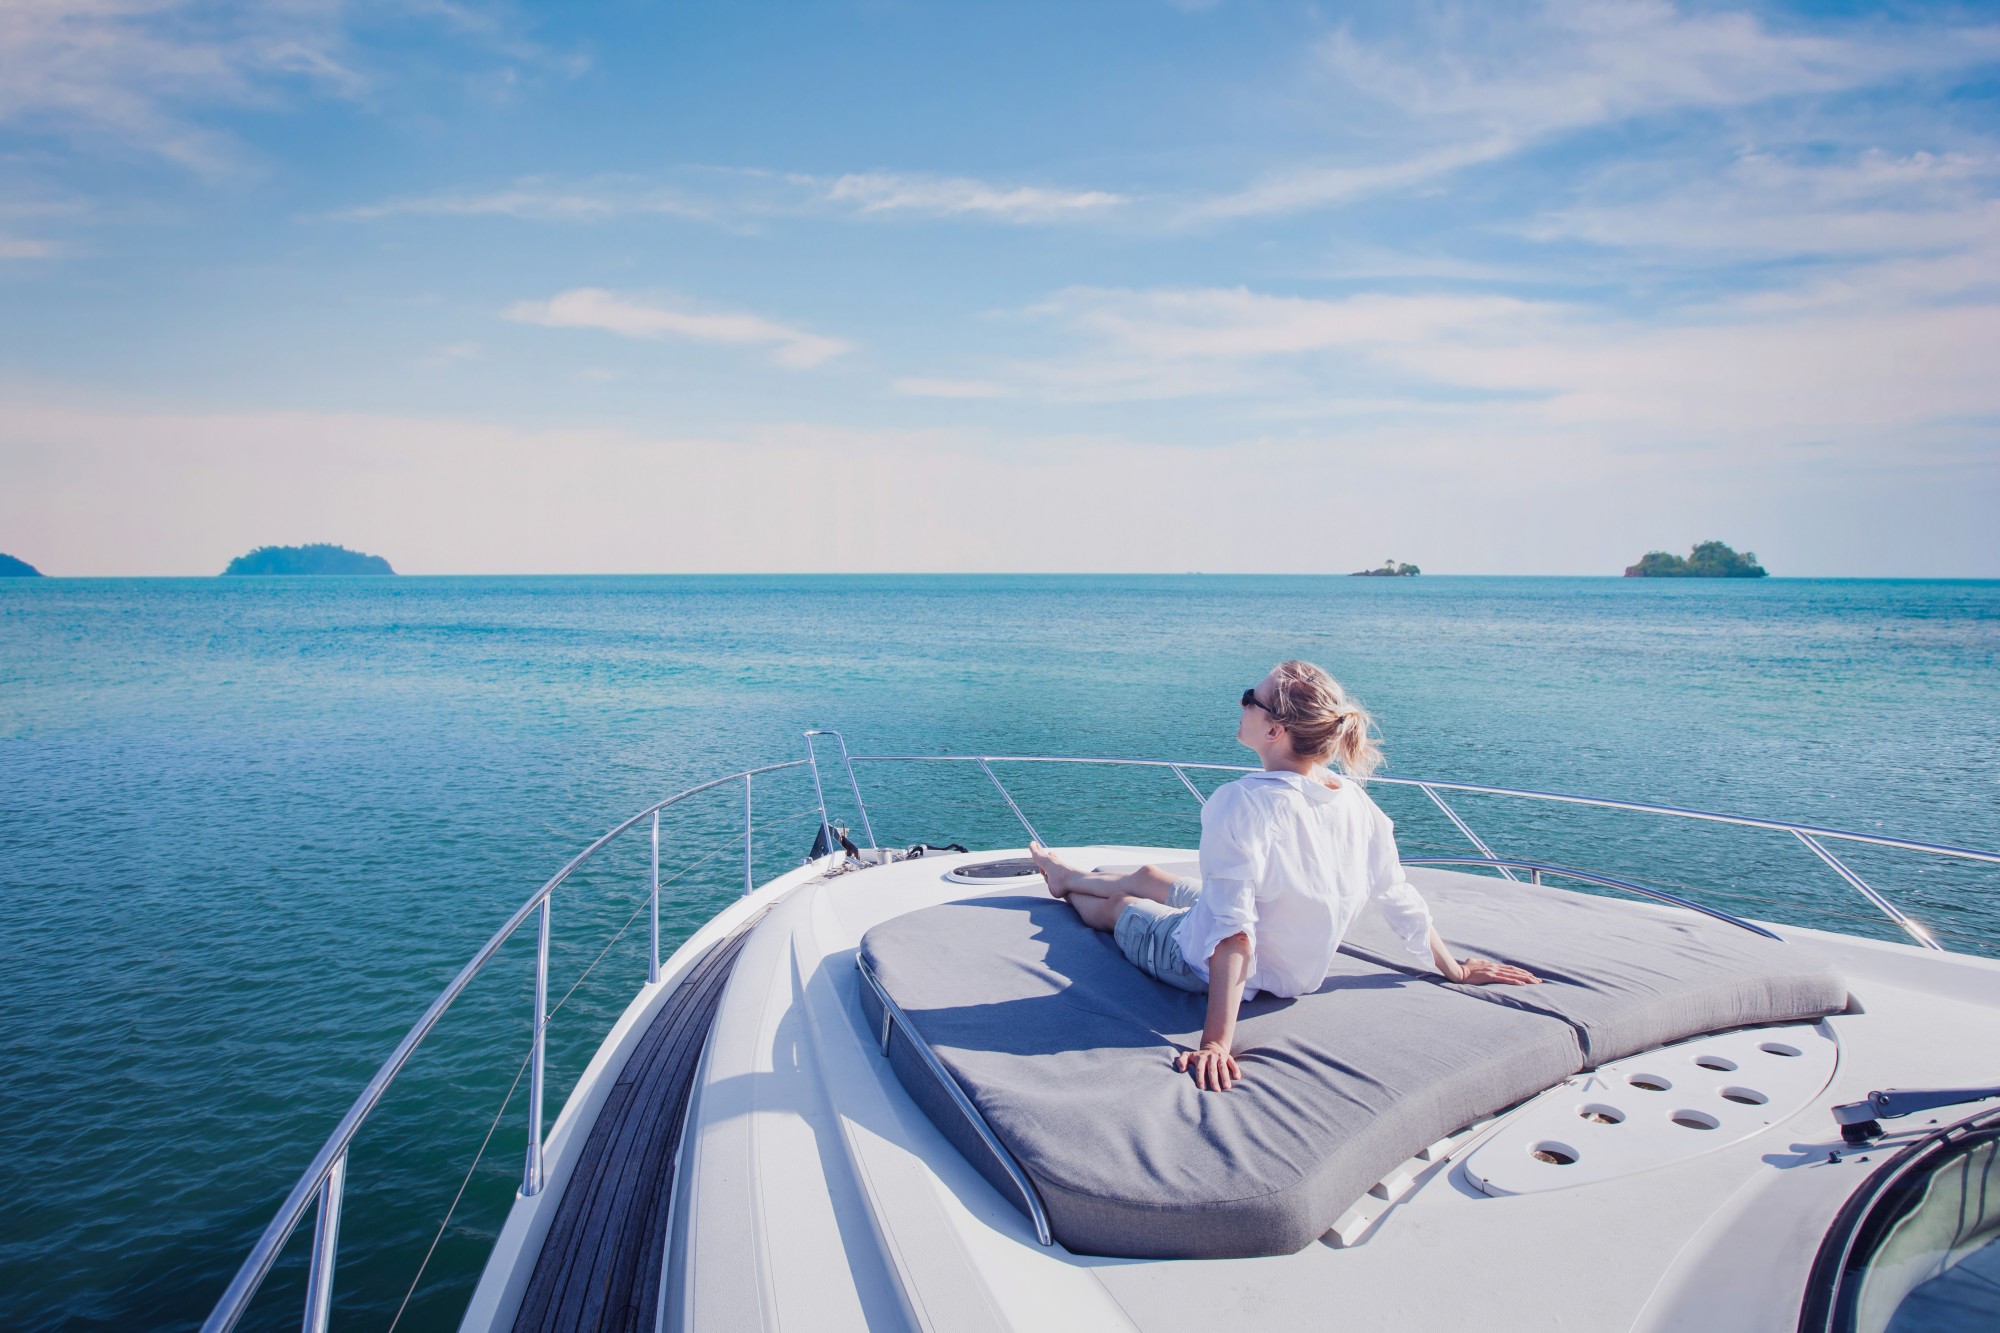 Boat Hire Near Me: How To Choose the Right Boat To Hire